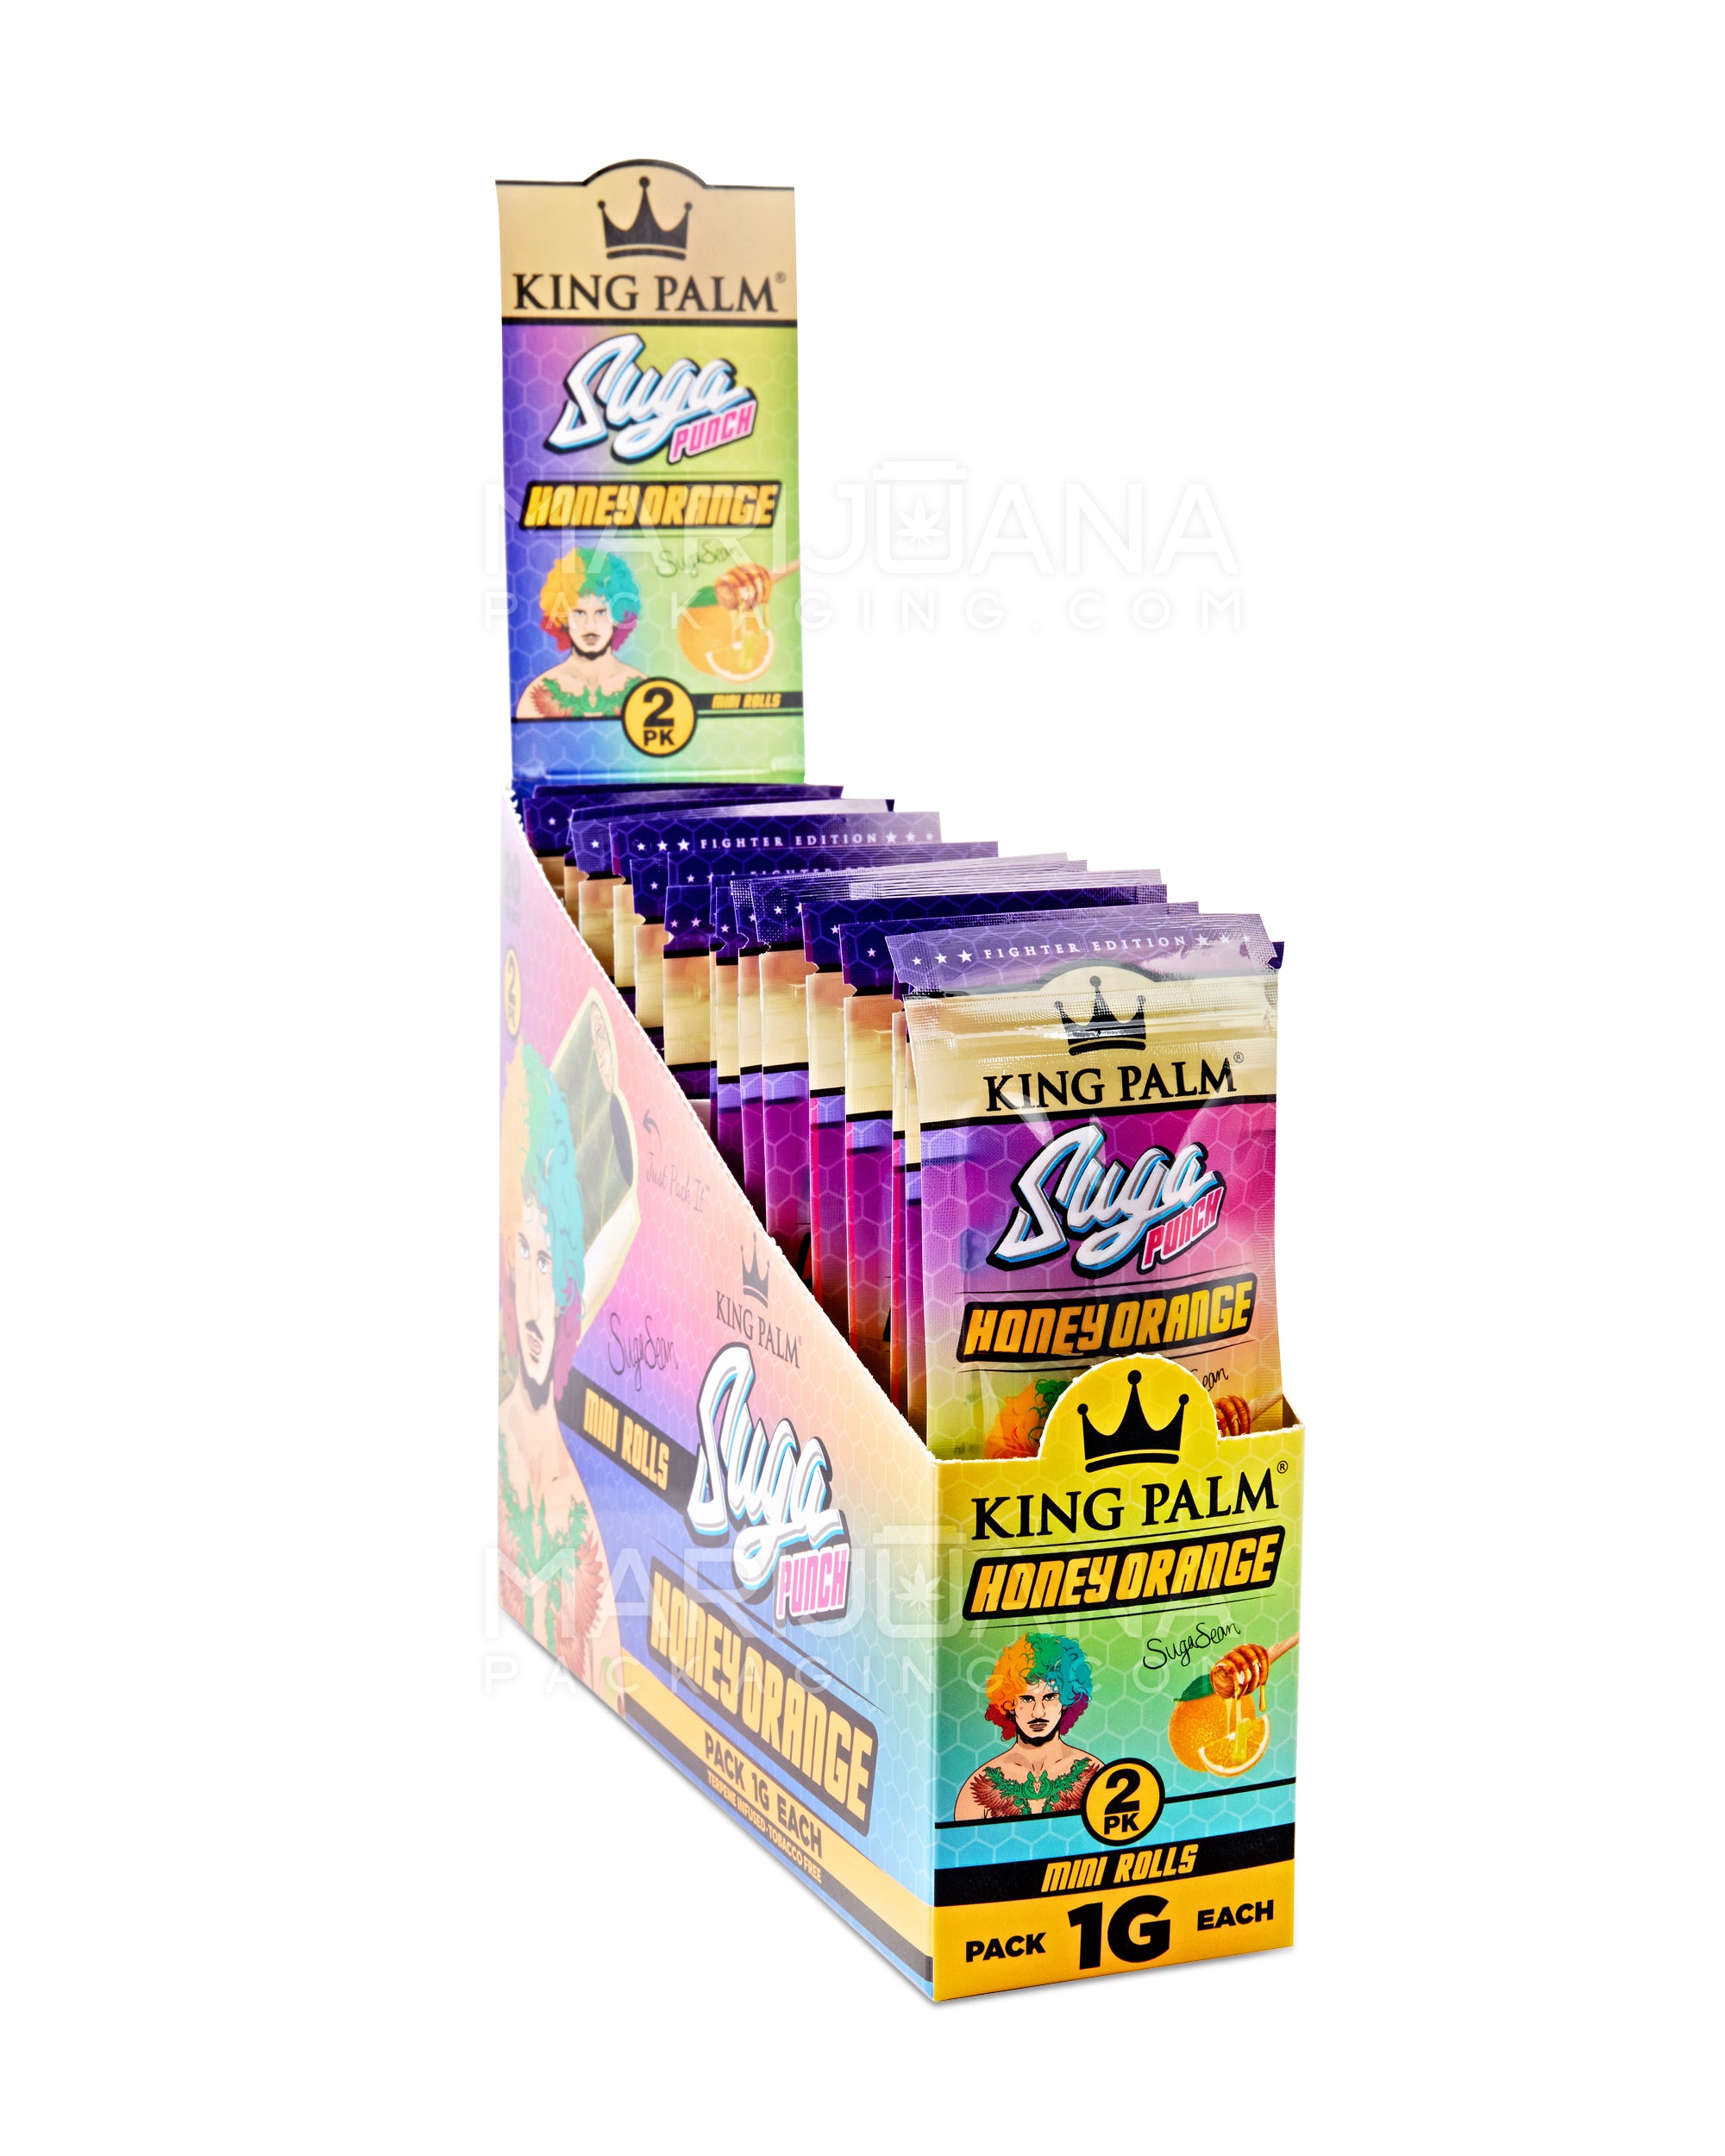 KING PALM | 'Retail Display' Mini Green Natural Leaf Blunt Wraps | 84mm - Suga Punch - 20 Count